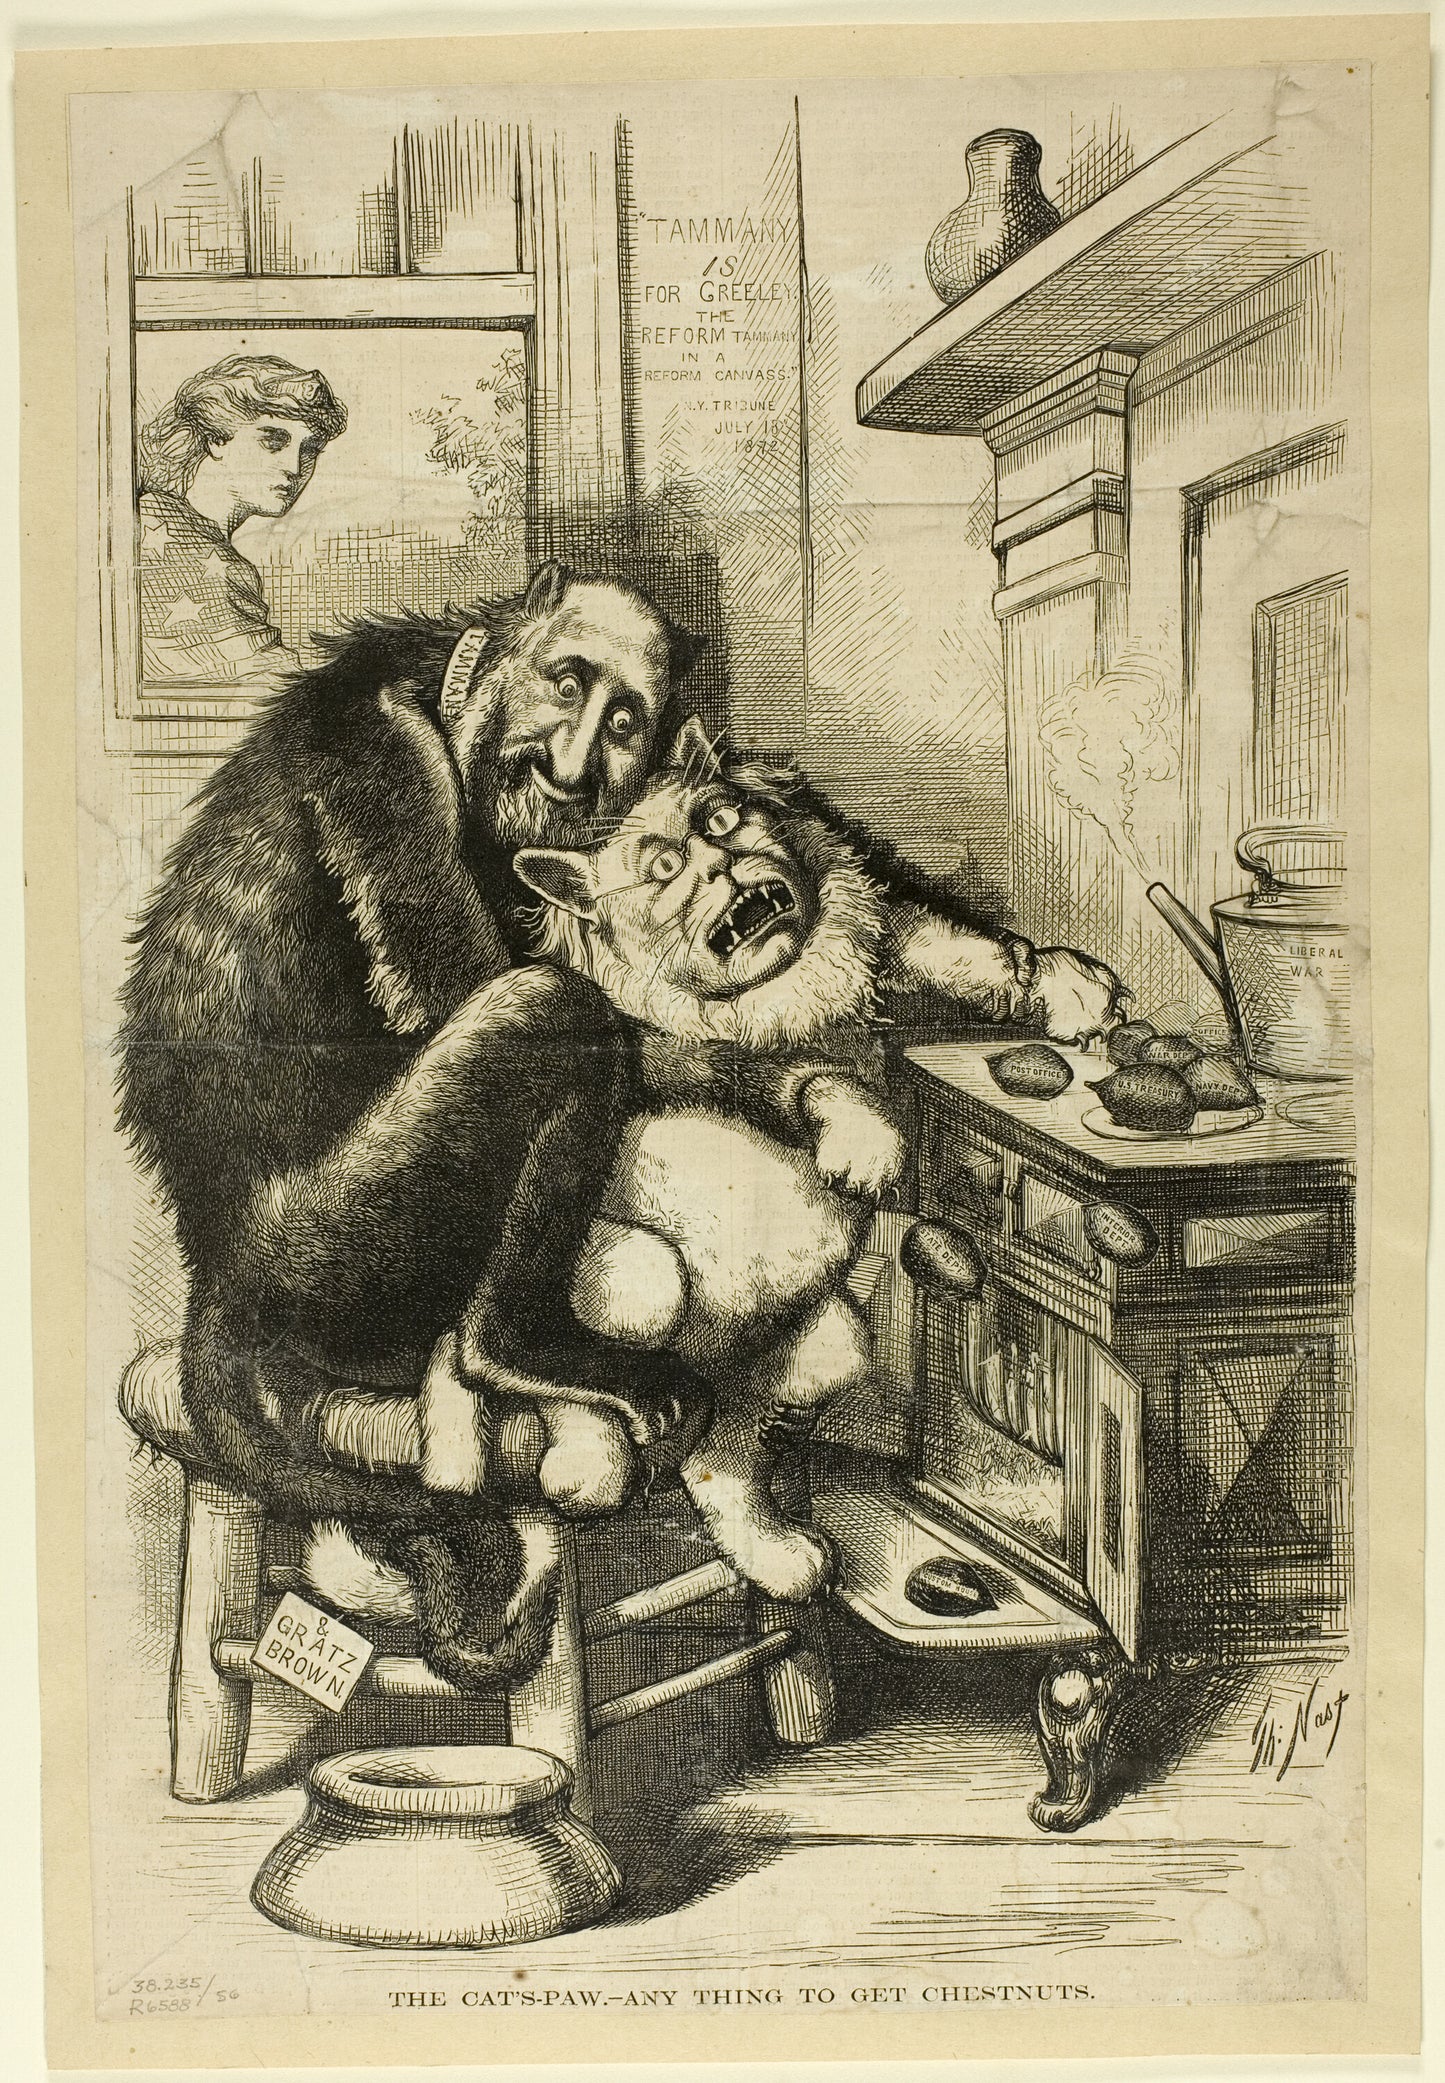 The Cat’s-Paw, Any Thing to Get Chestnuts by Thomas Nast - July 18, 1892 - Postcard